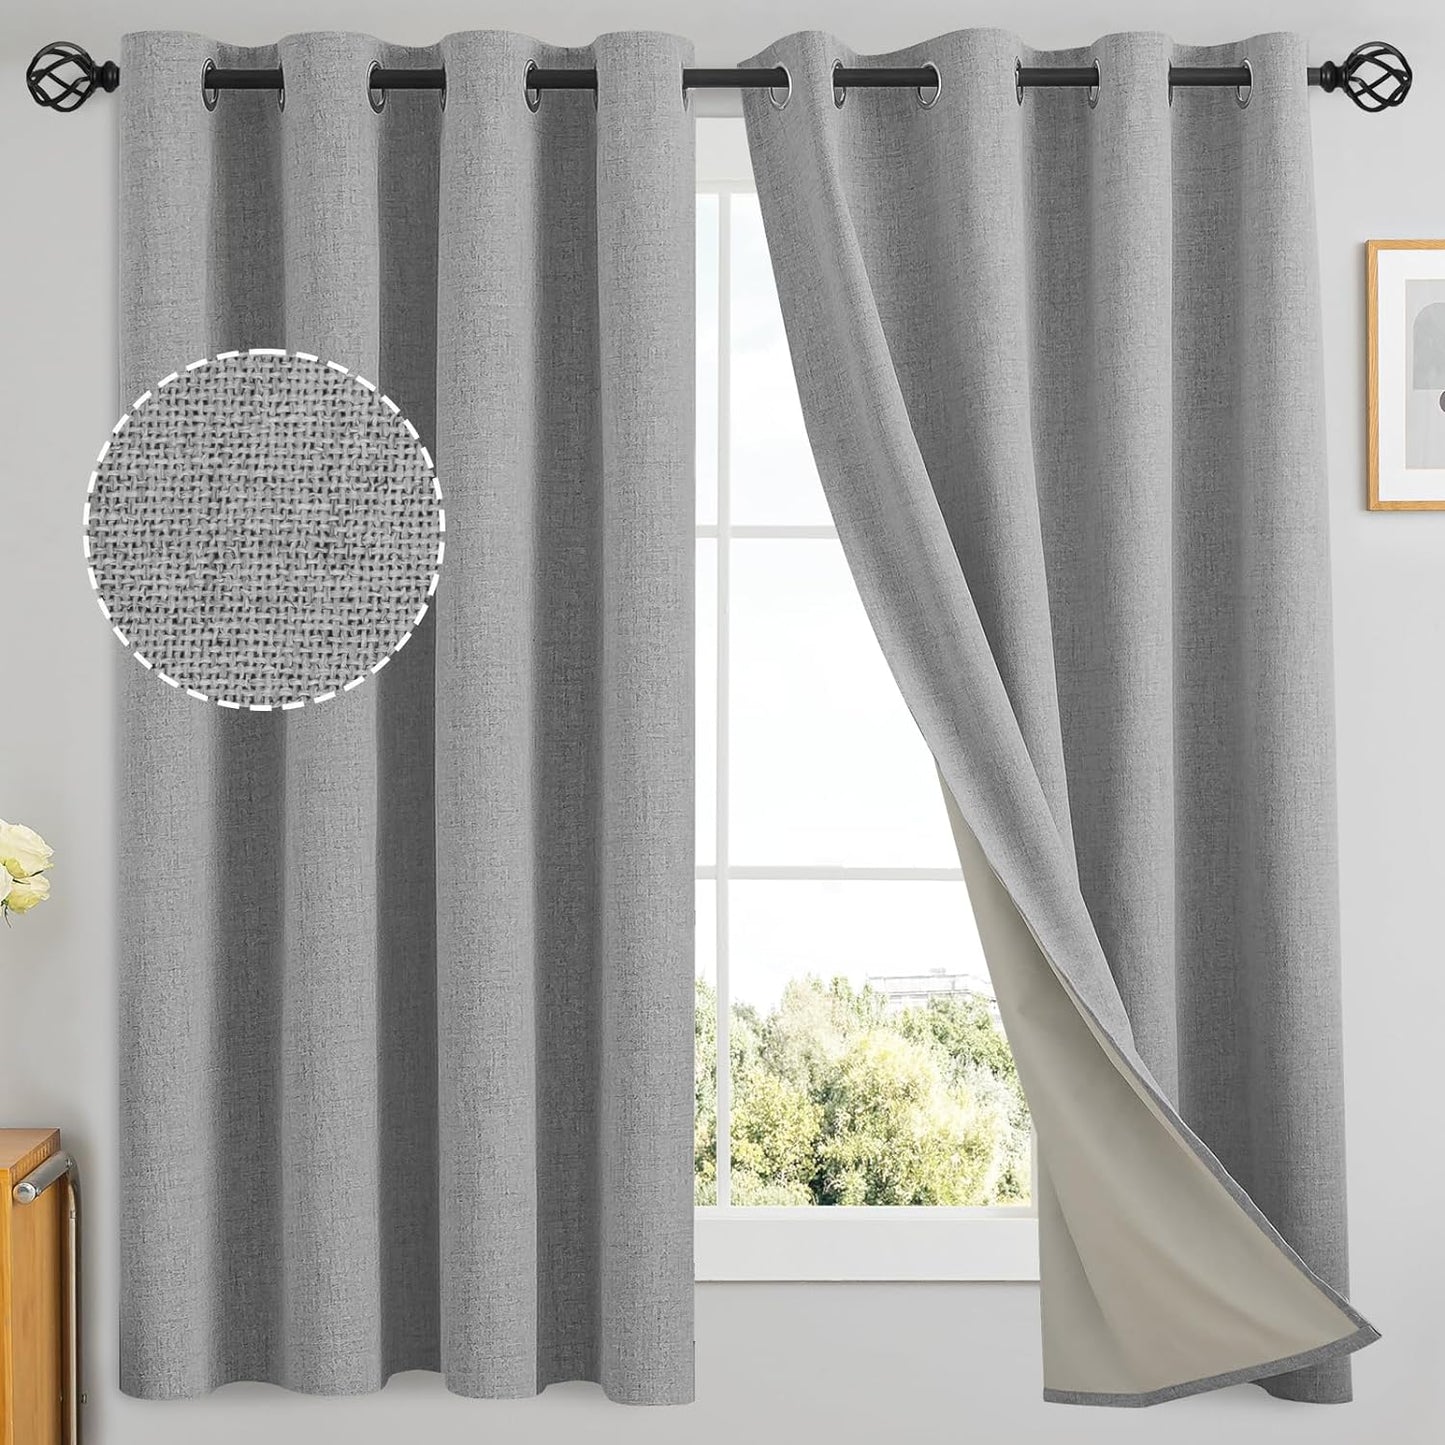 Yakamok Natural Linen Curtains 100% Blackout 84 Inches Long,Room Darkening Textured Curtains for Living Room Thermal Grommet Bedroom Curtains 2 Panels with Greyish White Liner  Yakamok Dove Grey 52W X 63L / 2 Panels 